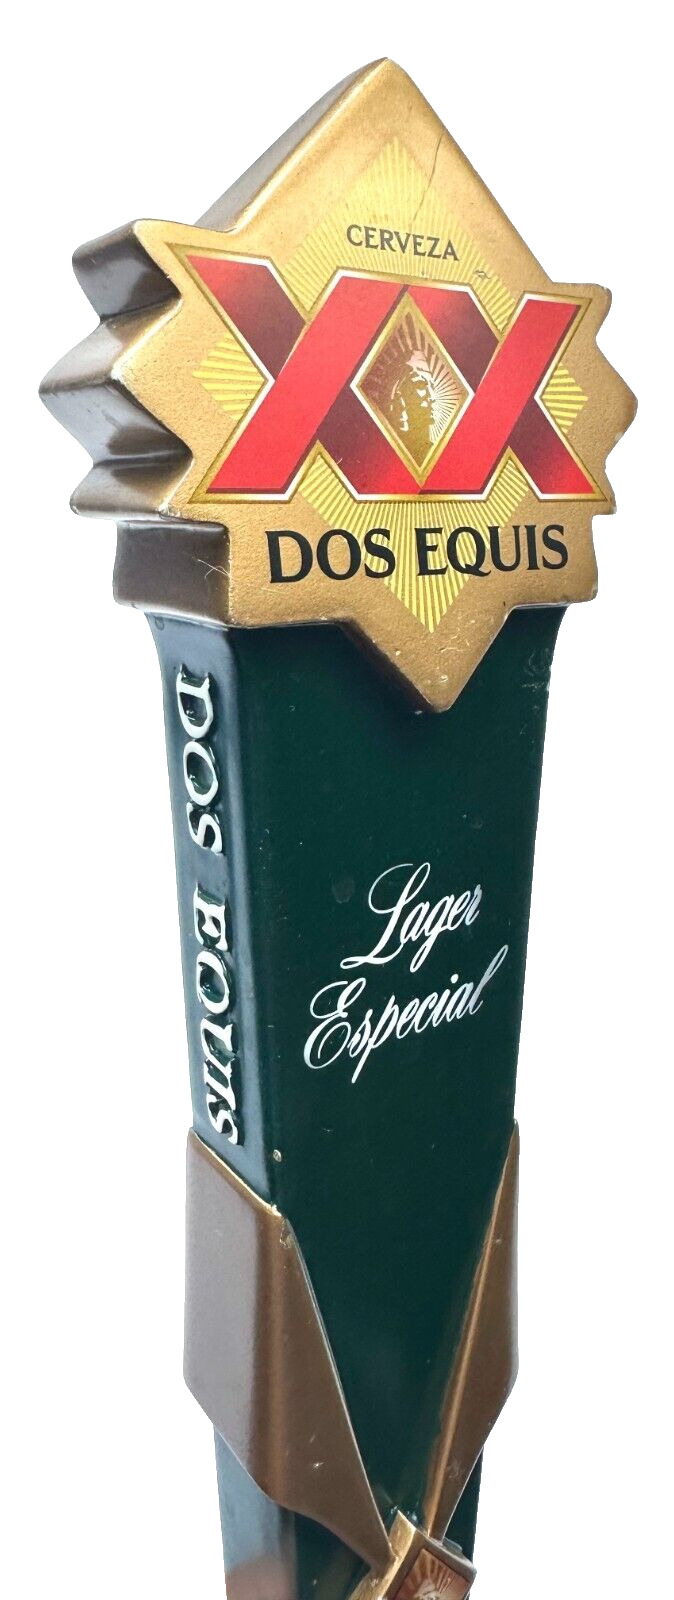 DOS EQUIS - LAGER ESPECIAL - BEER TAP HANDLE 🍺🍺